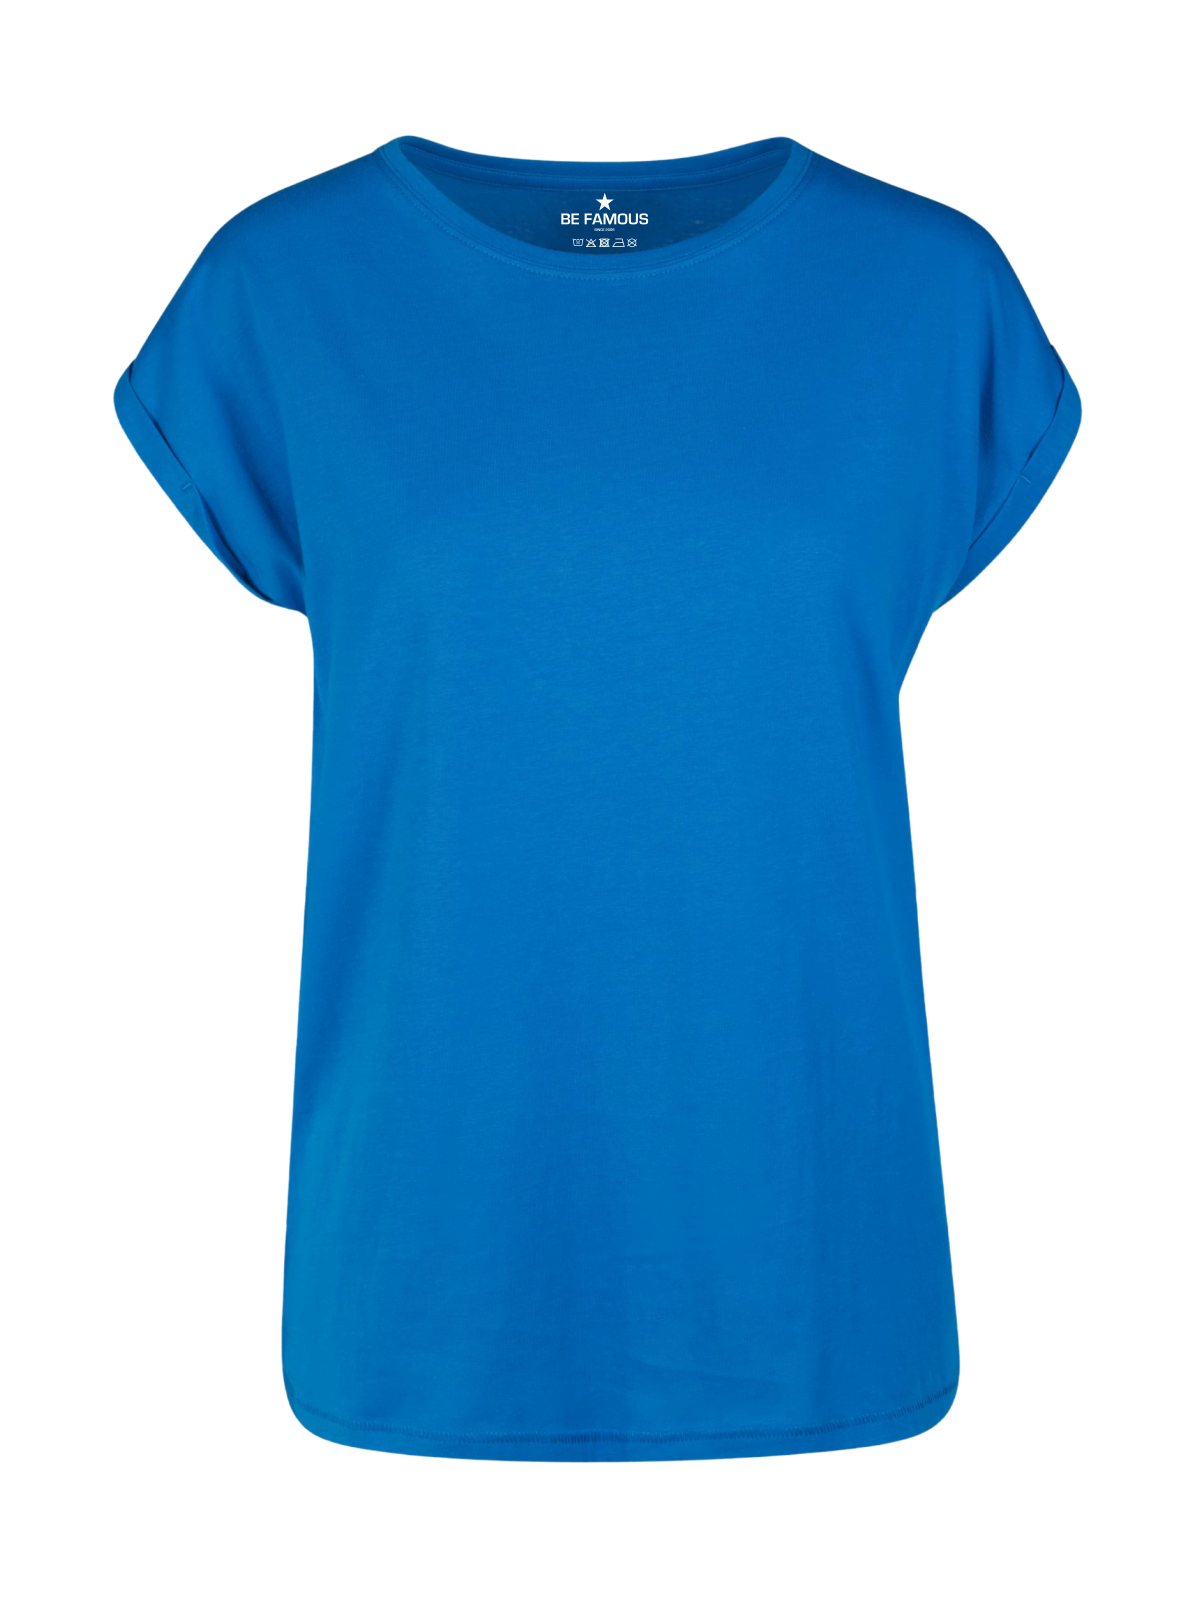 Be Famous Classic Roll Up T-Shirt BFW01  bright blue  5XL